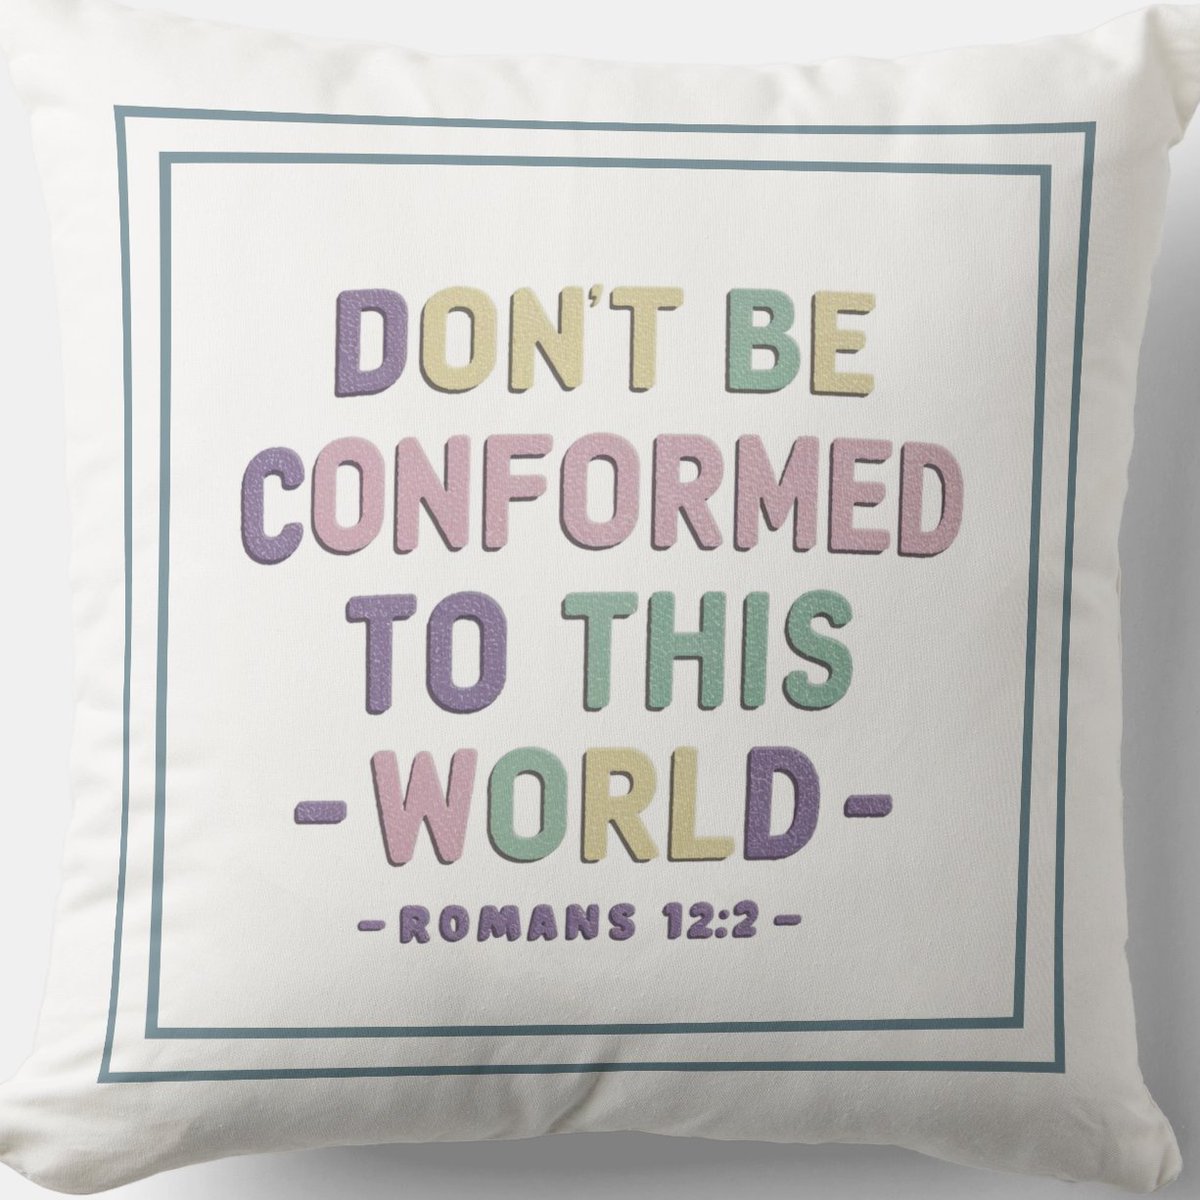 Don’t Be Conformed To This World #Cushion zazzle.com/don_t_be_confo… Throw #Pillow #Blessing #JesusChrist #JesusSaves #Jesus #christian #spiritual #Homedecoration #uniquegift #giftideas #MothersDayGifts #giftformom #giftidea #HolySpirit #pillows #giftshop #giftsforher #giftsformom